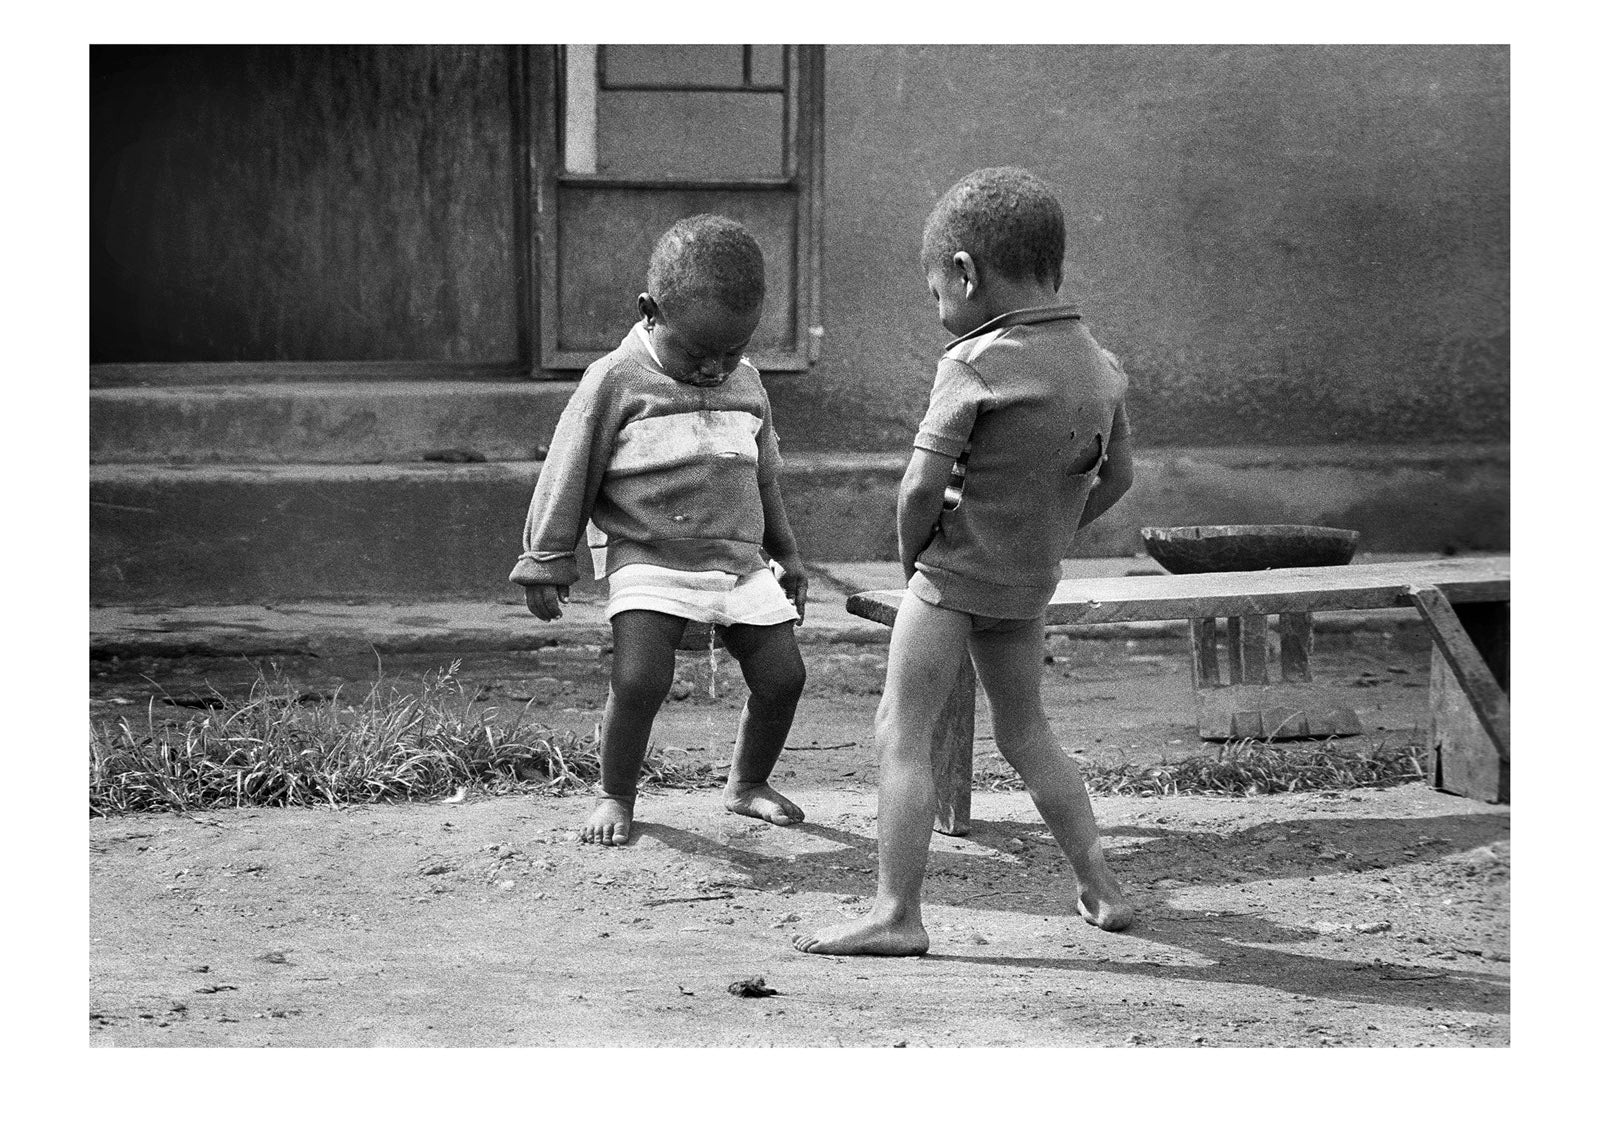 Two young boys playing in the street urinate at each other in fun. Kabale, Western Uganda.